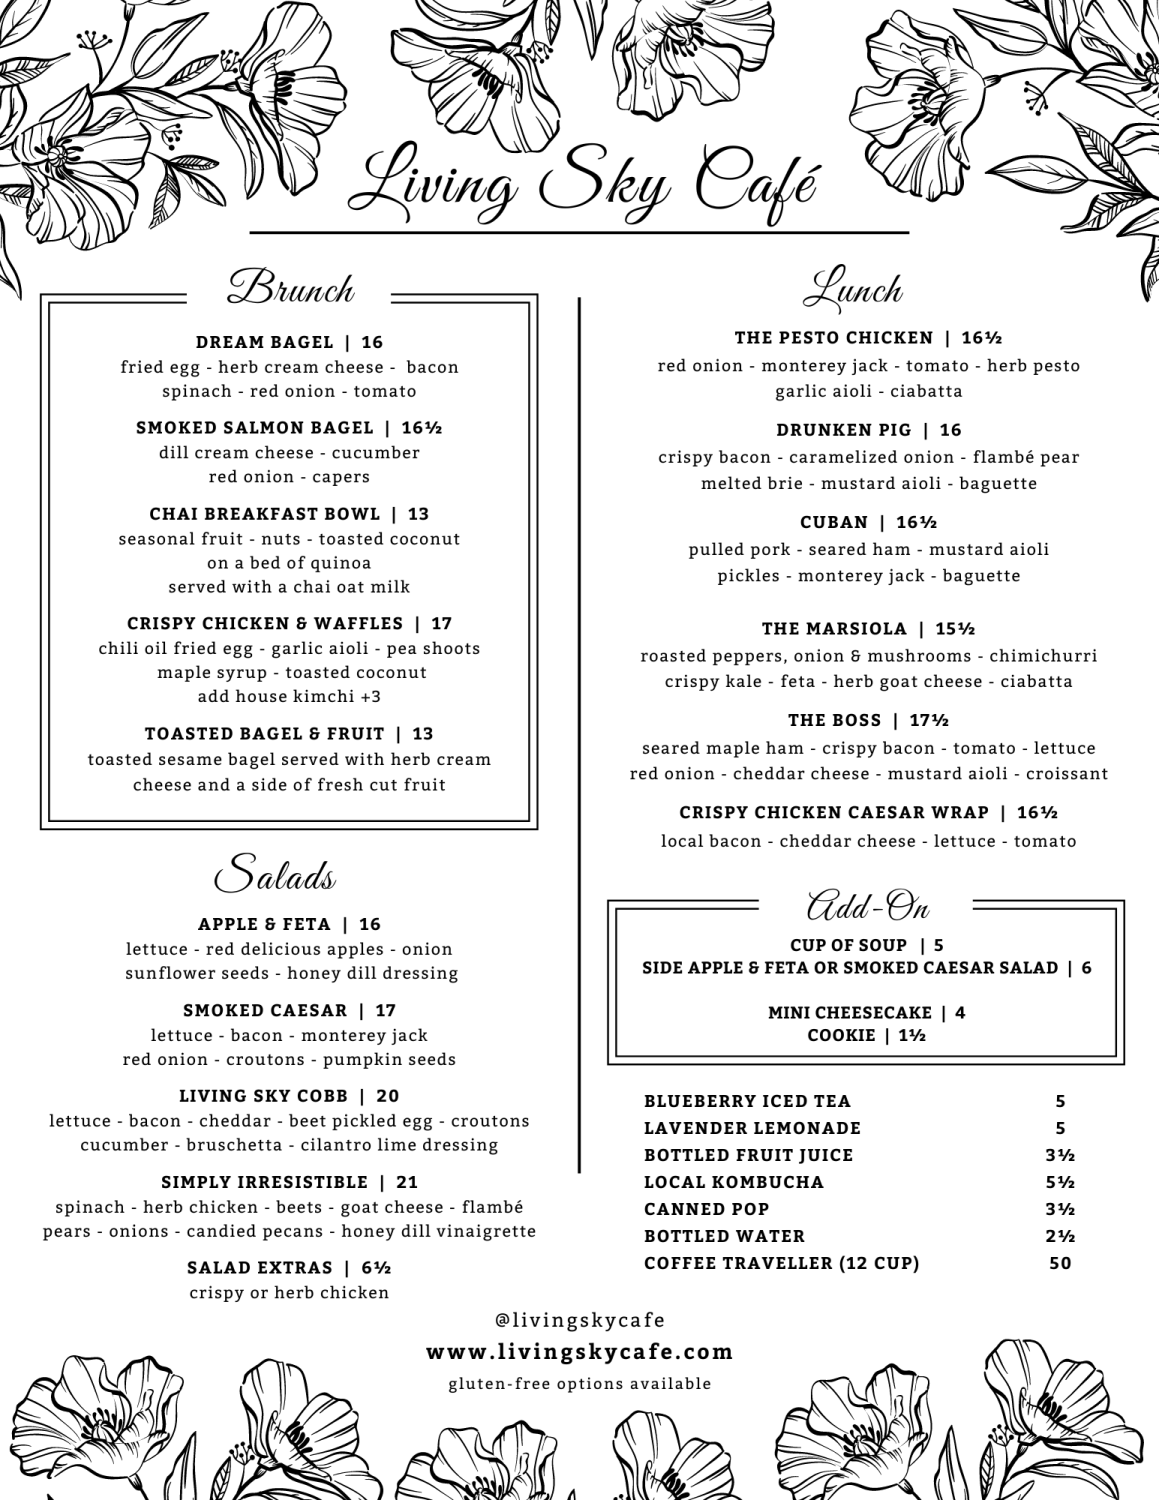 Takeaway lunch menu for groups of 12 or less